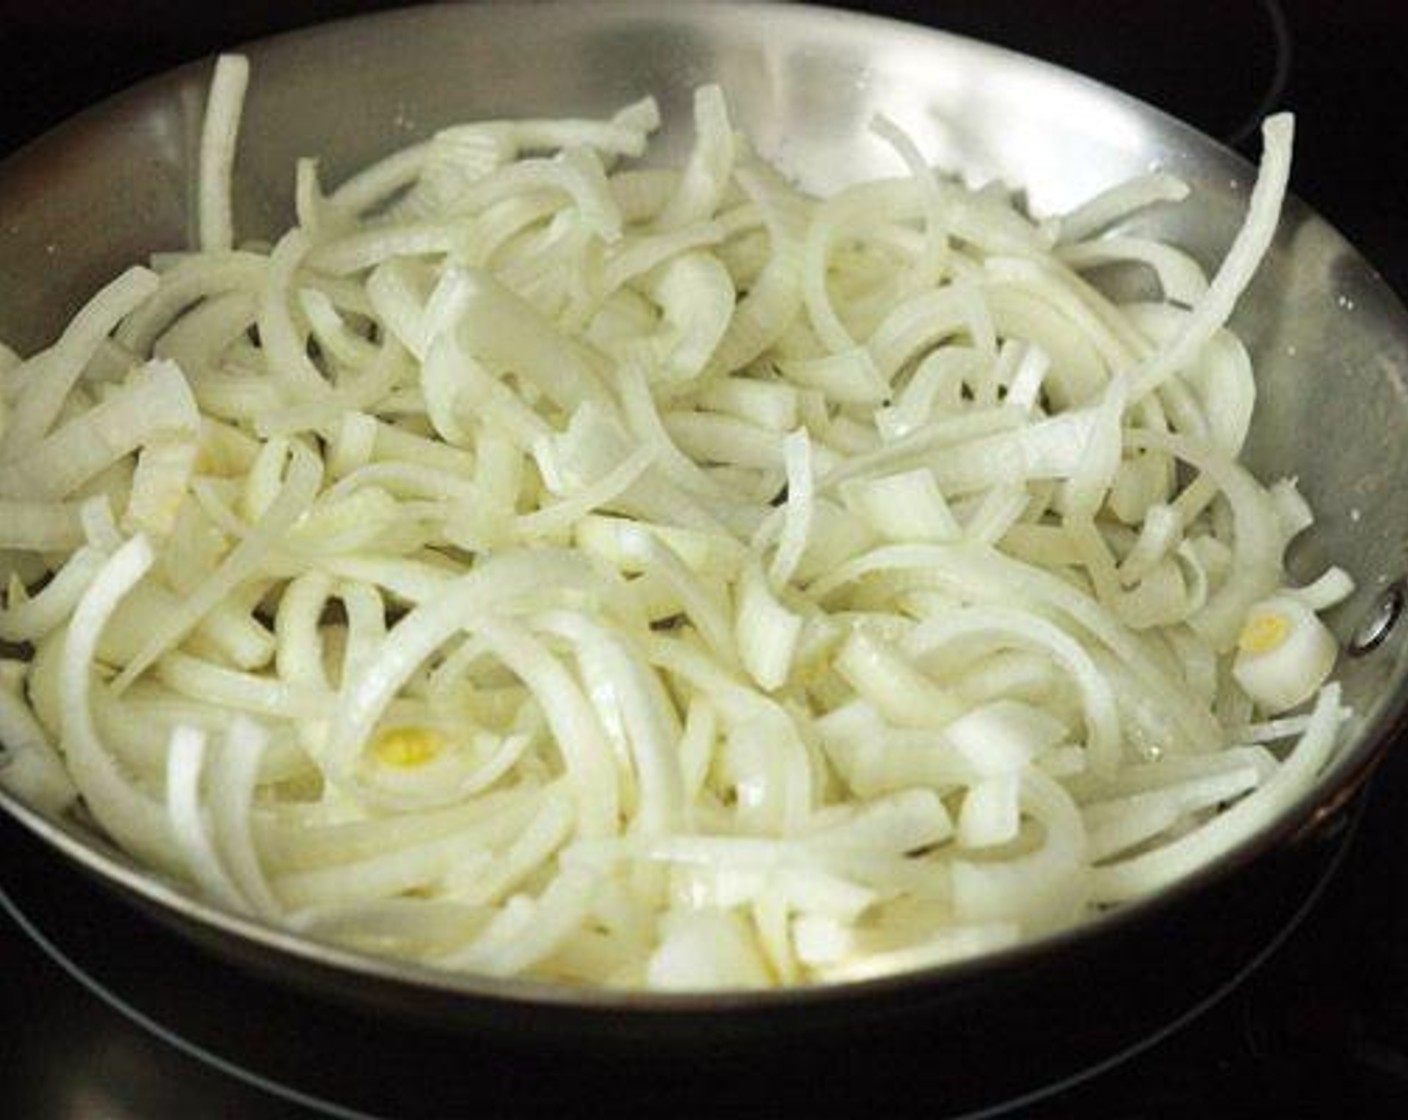 step 2 Melt 2 tablespoons of Unsalted Butter (2 Tbsp) in a large frying pan over medium heat. Once butter has melted, add the onions and Salt (1 tsp) and toss well. Cook onions over medium for about 30 minutes, stirring often to caramelize all the onions.